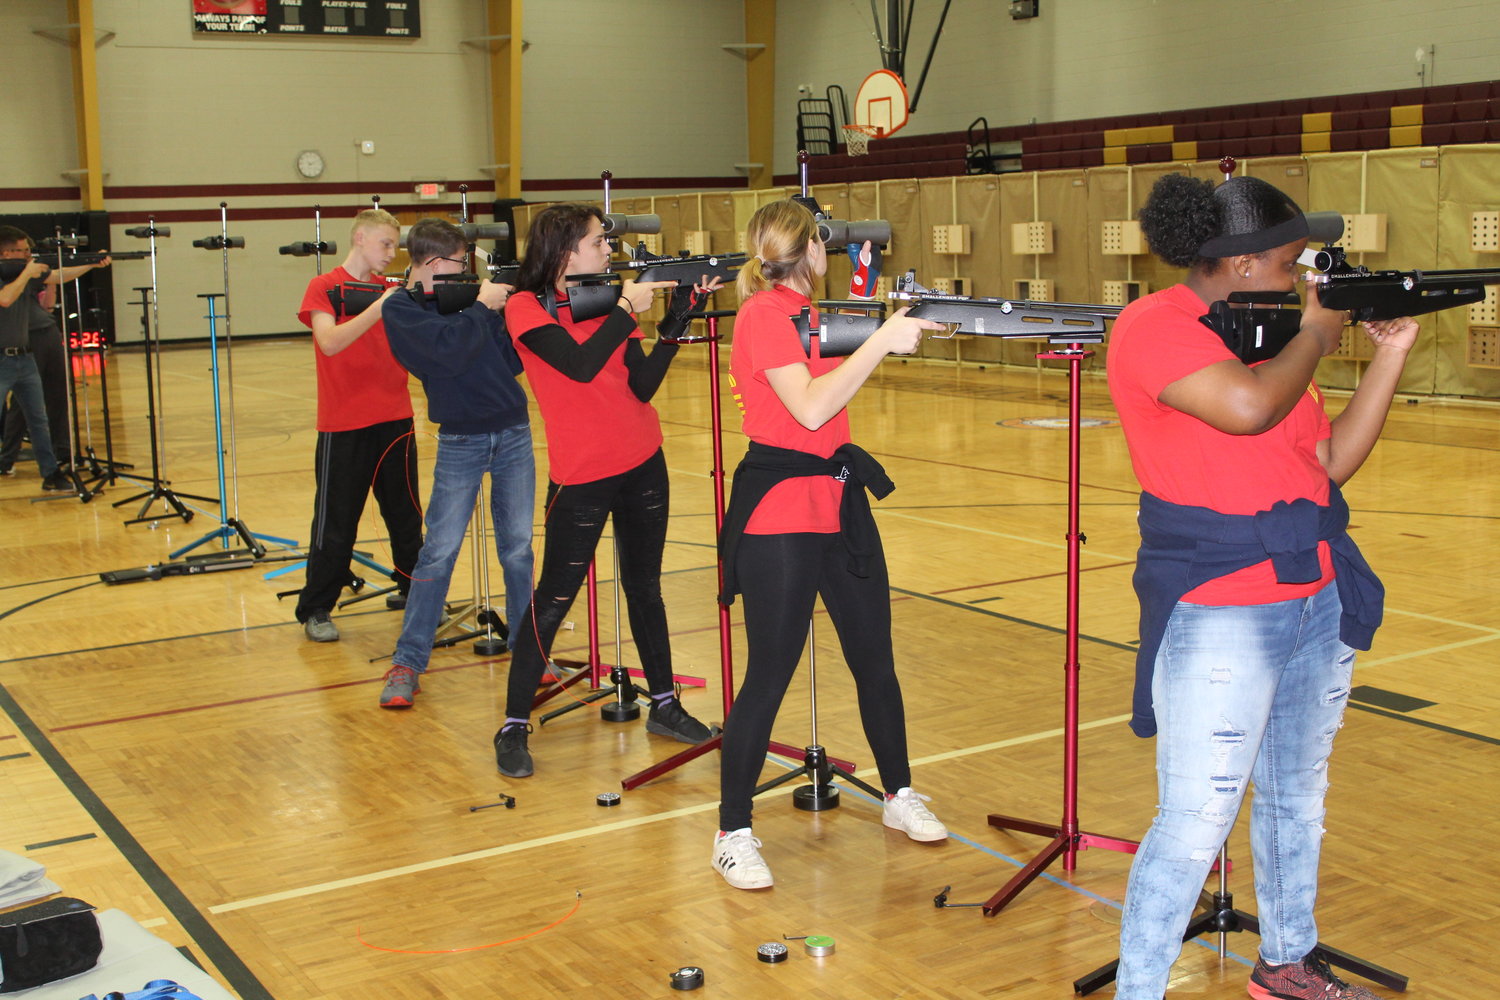 Members of the Robertsdale High School NJROTC air rifle team participate in a competition held last February in the gym at Robertsdale High School.